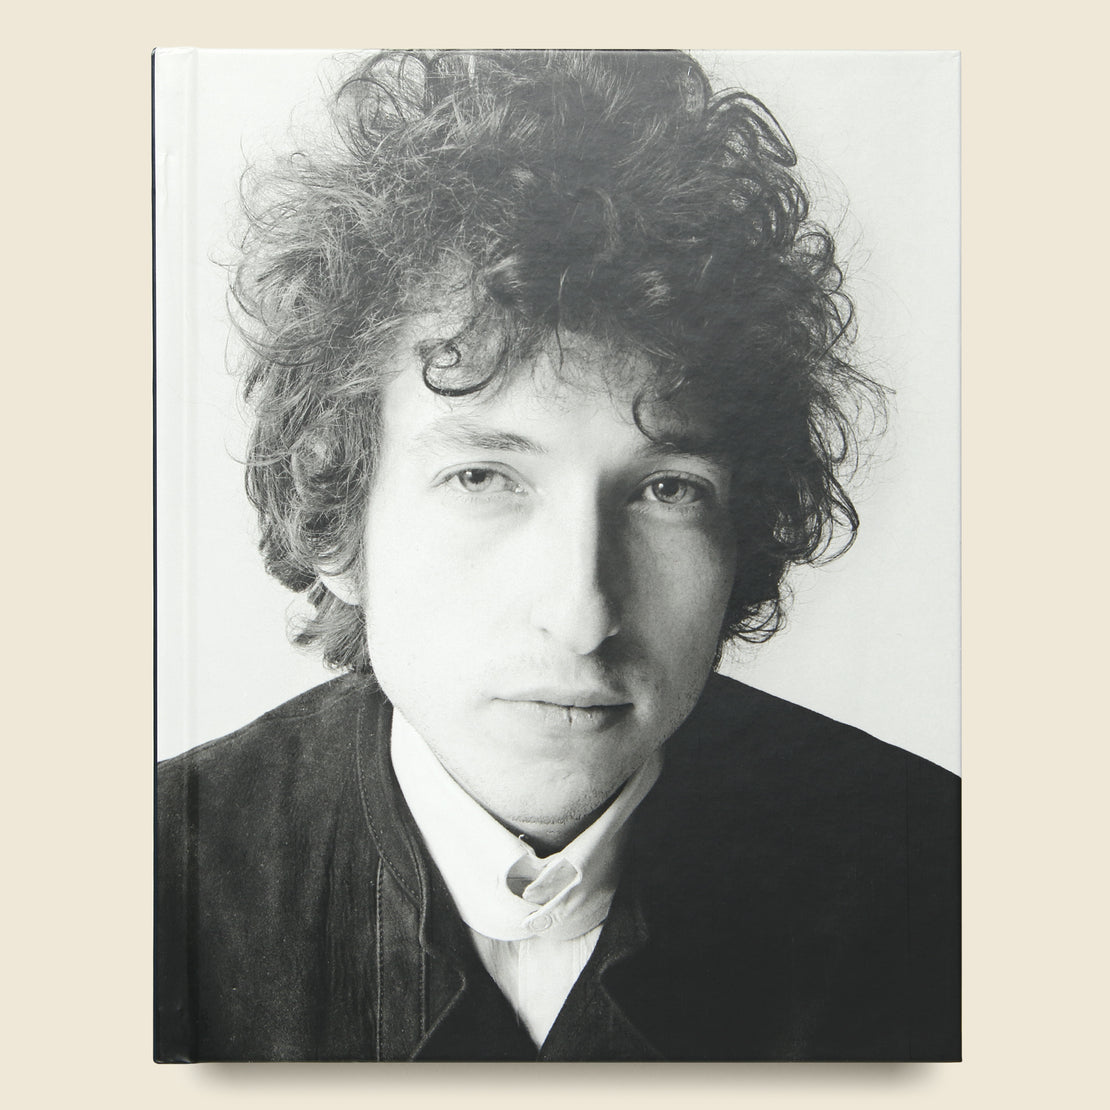 Bookstore Bob Dylan: Mixing Up the Medicine